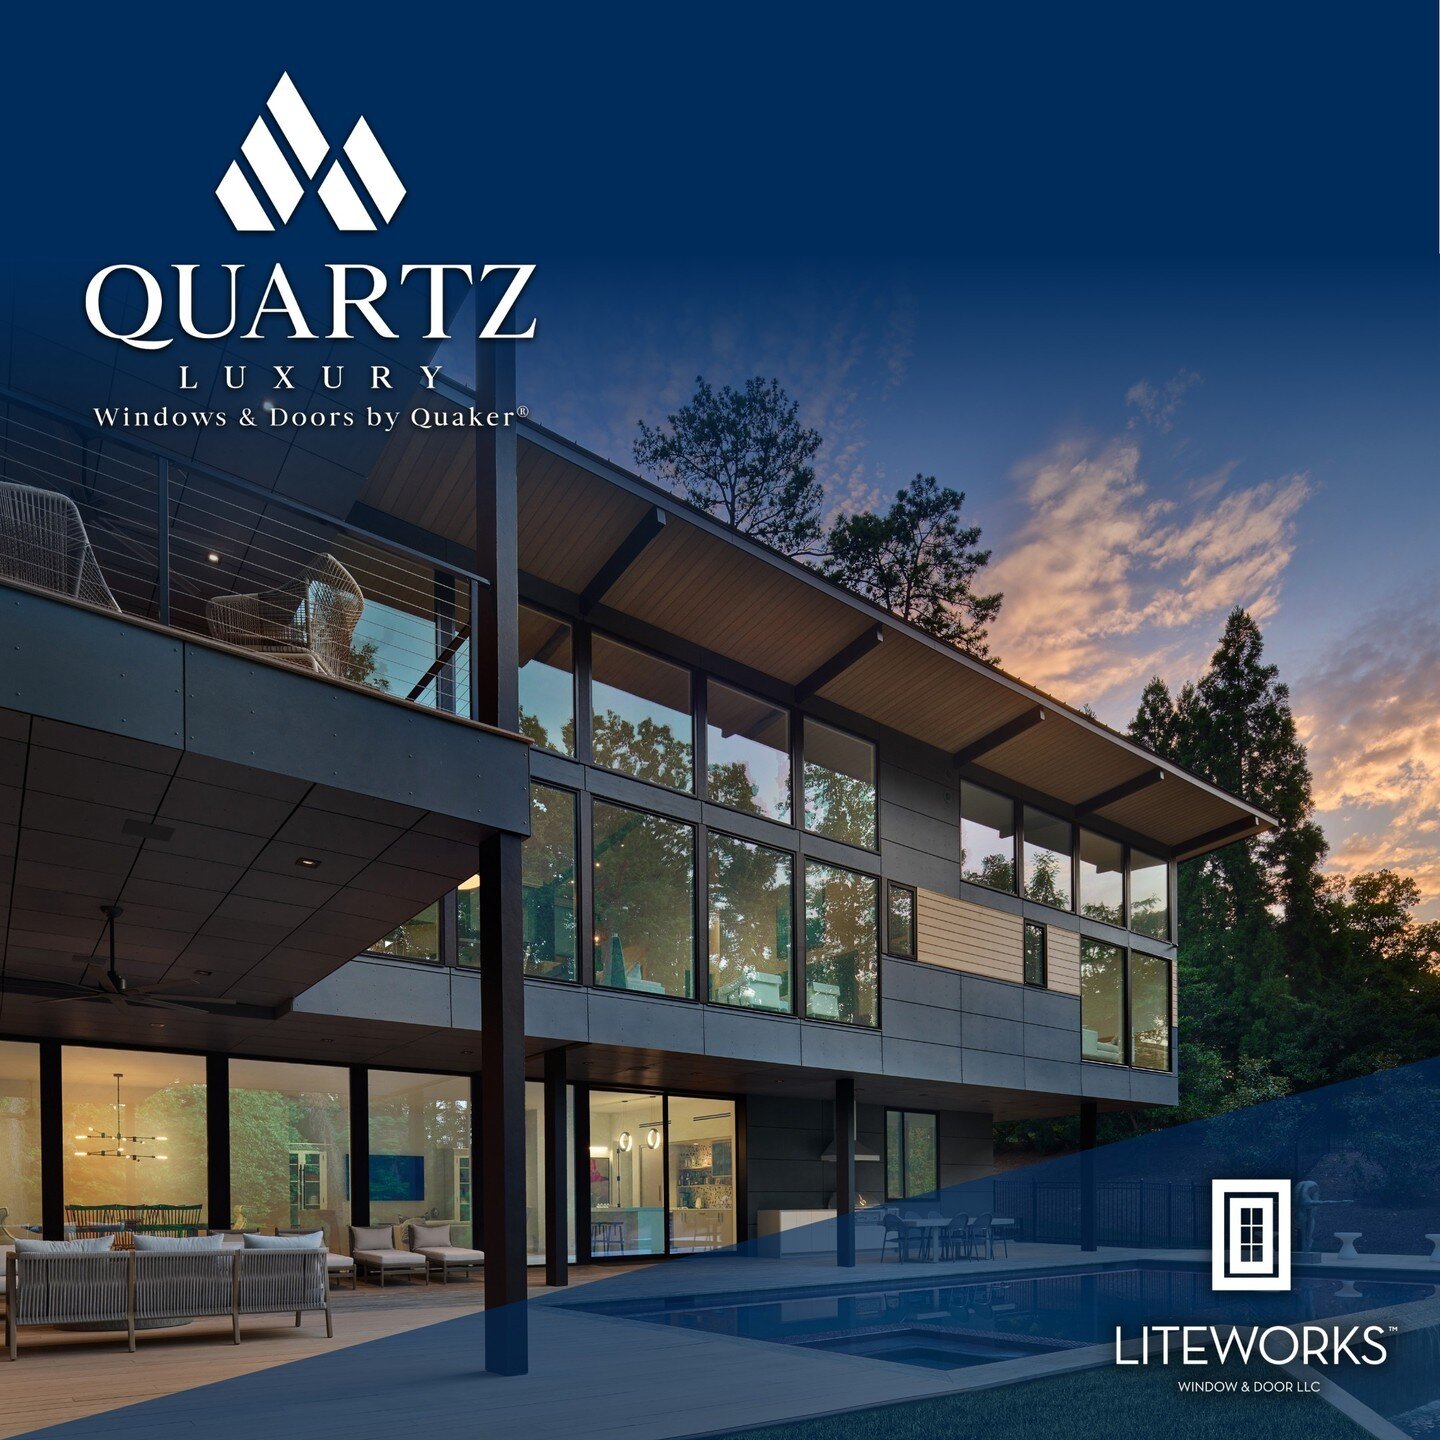 ✨ Supplier Spotlight ✨

Today's supplier spotlight is another one of our long-standing partners, @quartzluxurywindows. We've worked with them on countless projects in the last 10 years and look forward to many more in 2024!

Builder: @principlebuilde